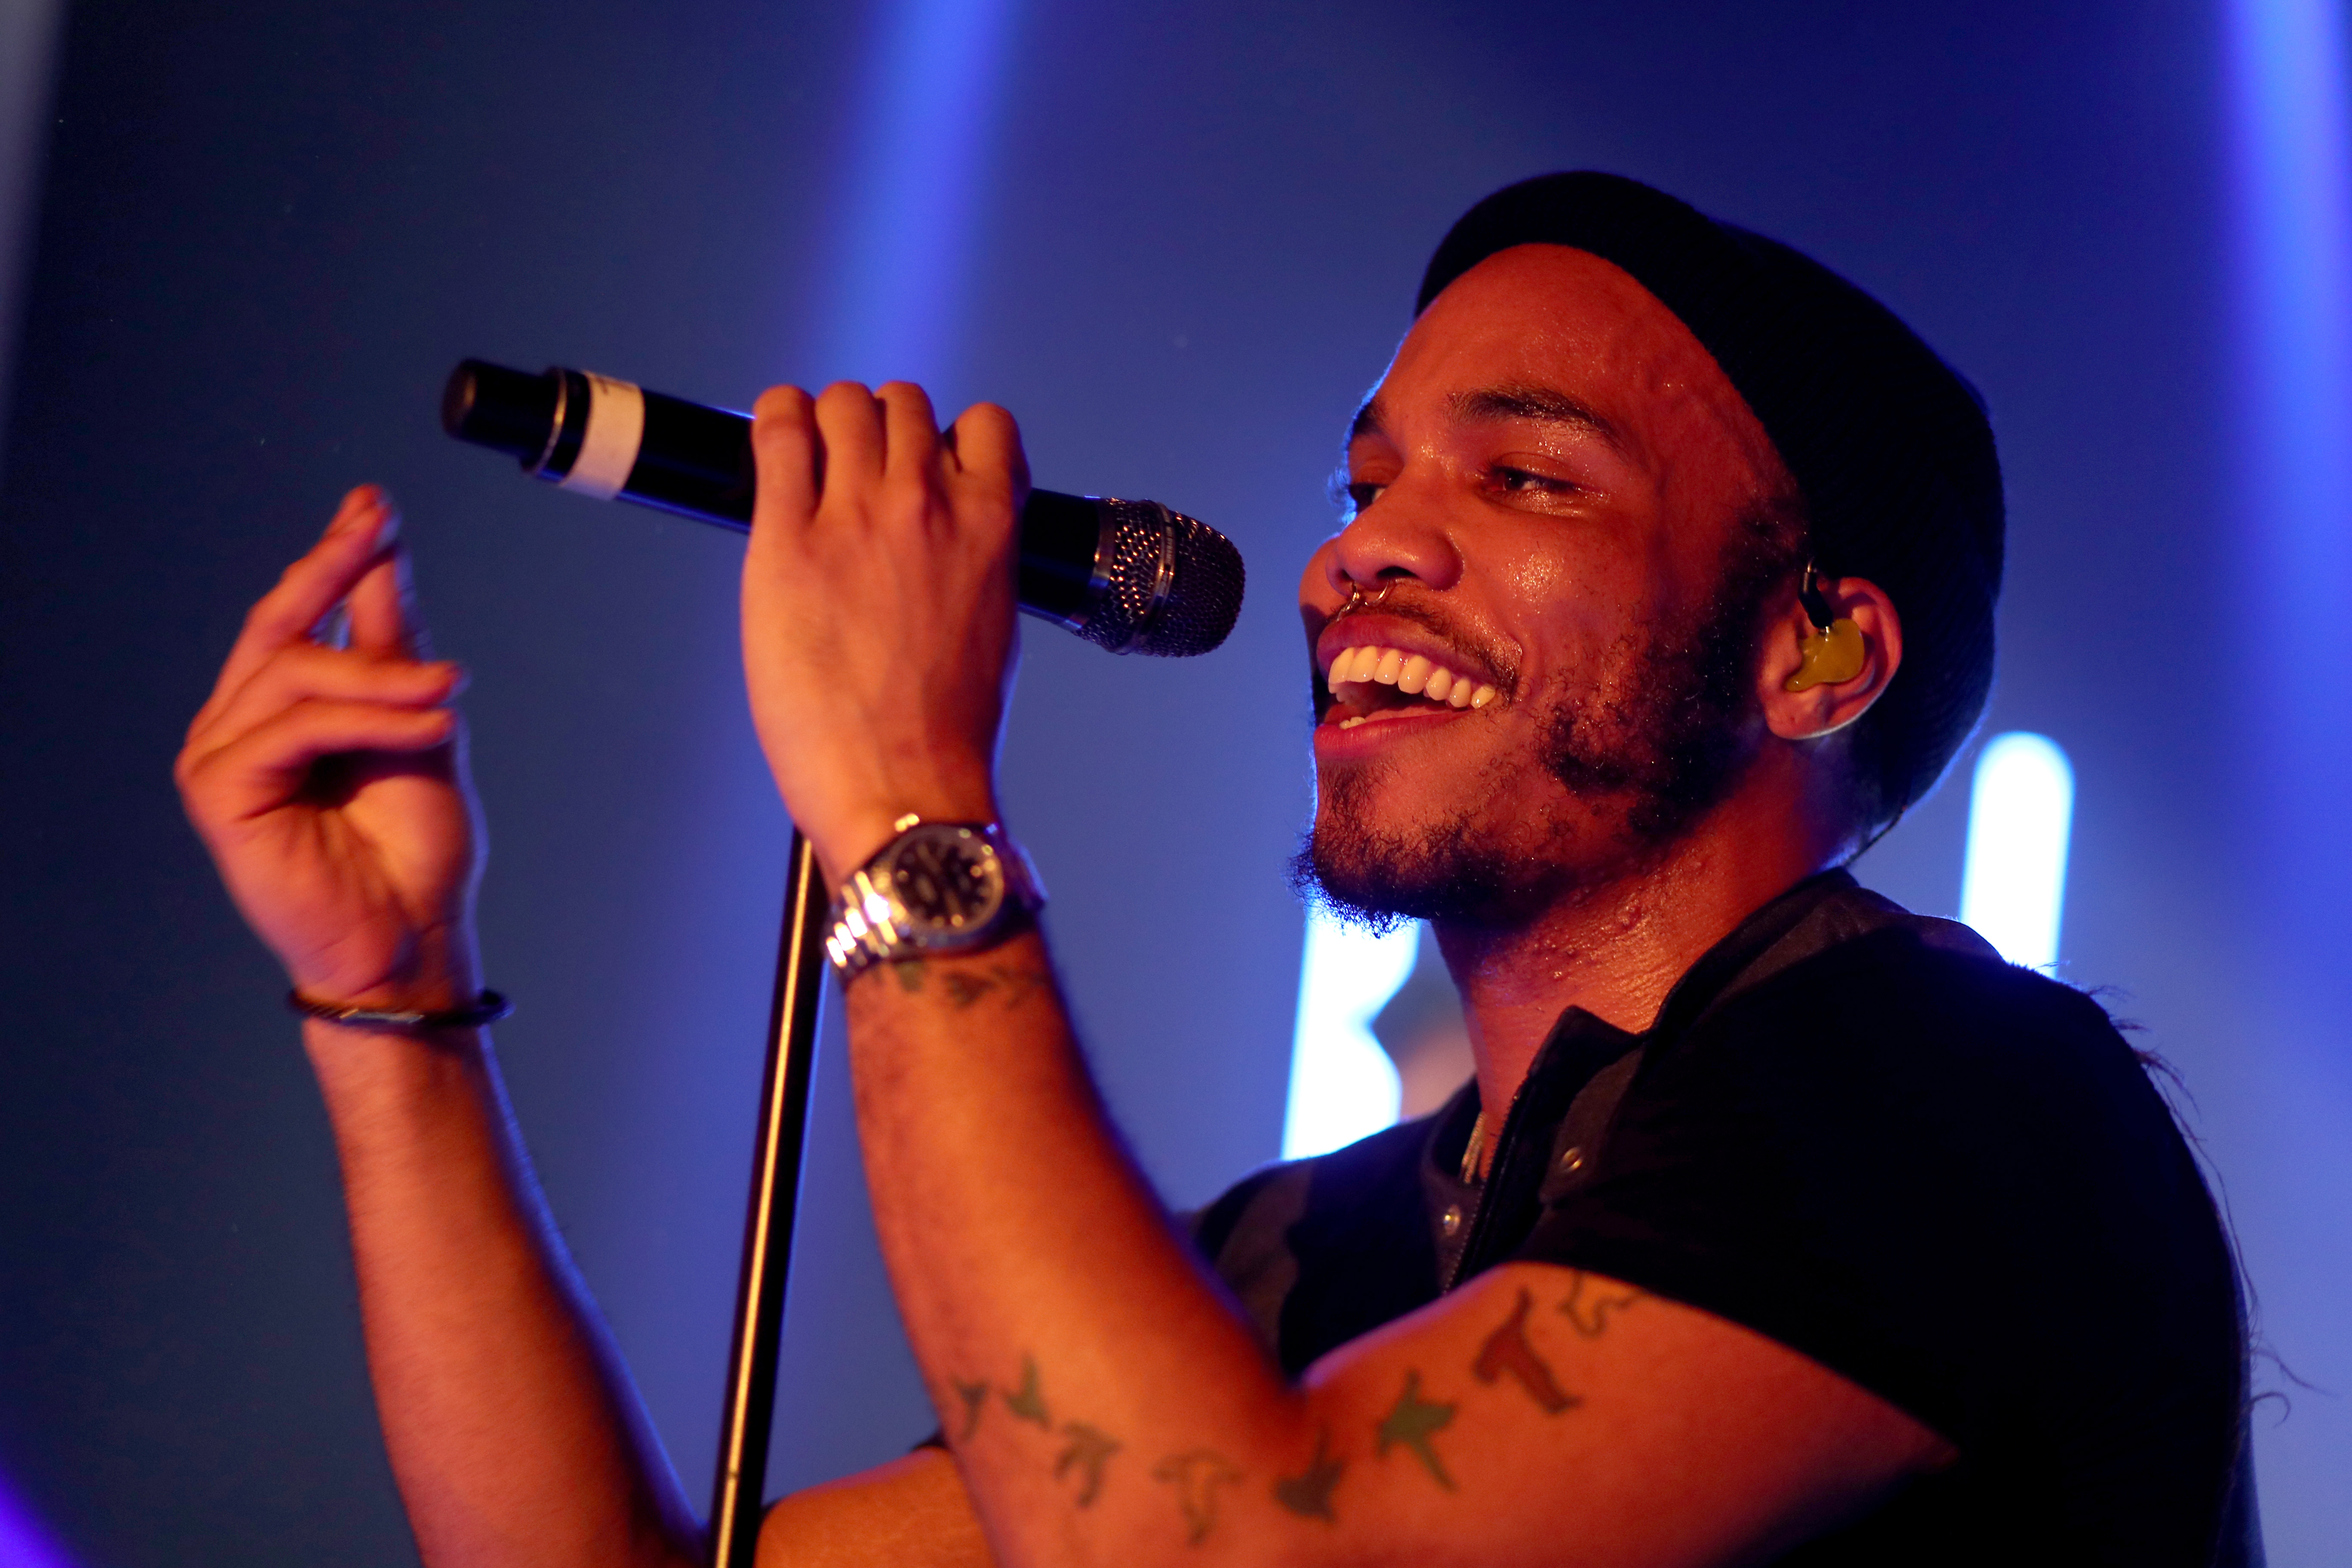 Anderson .Paak perform at the Masterpass #ThankTheFans House on February 10, 2017 in Los Angeles, California. (Photo by Christopher Polk/Getty)